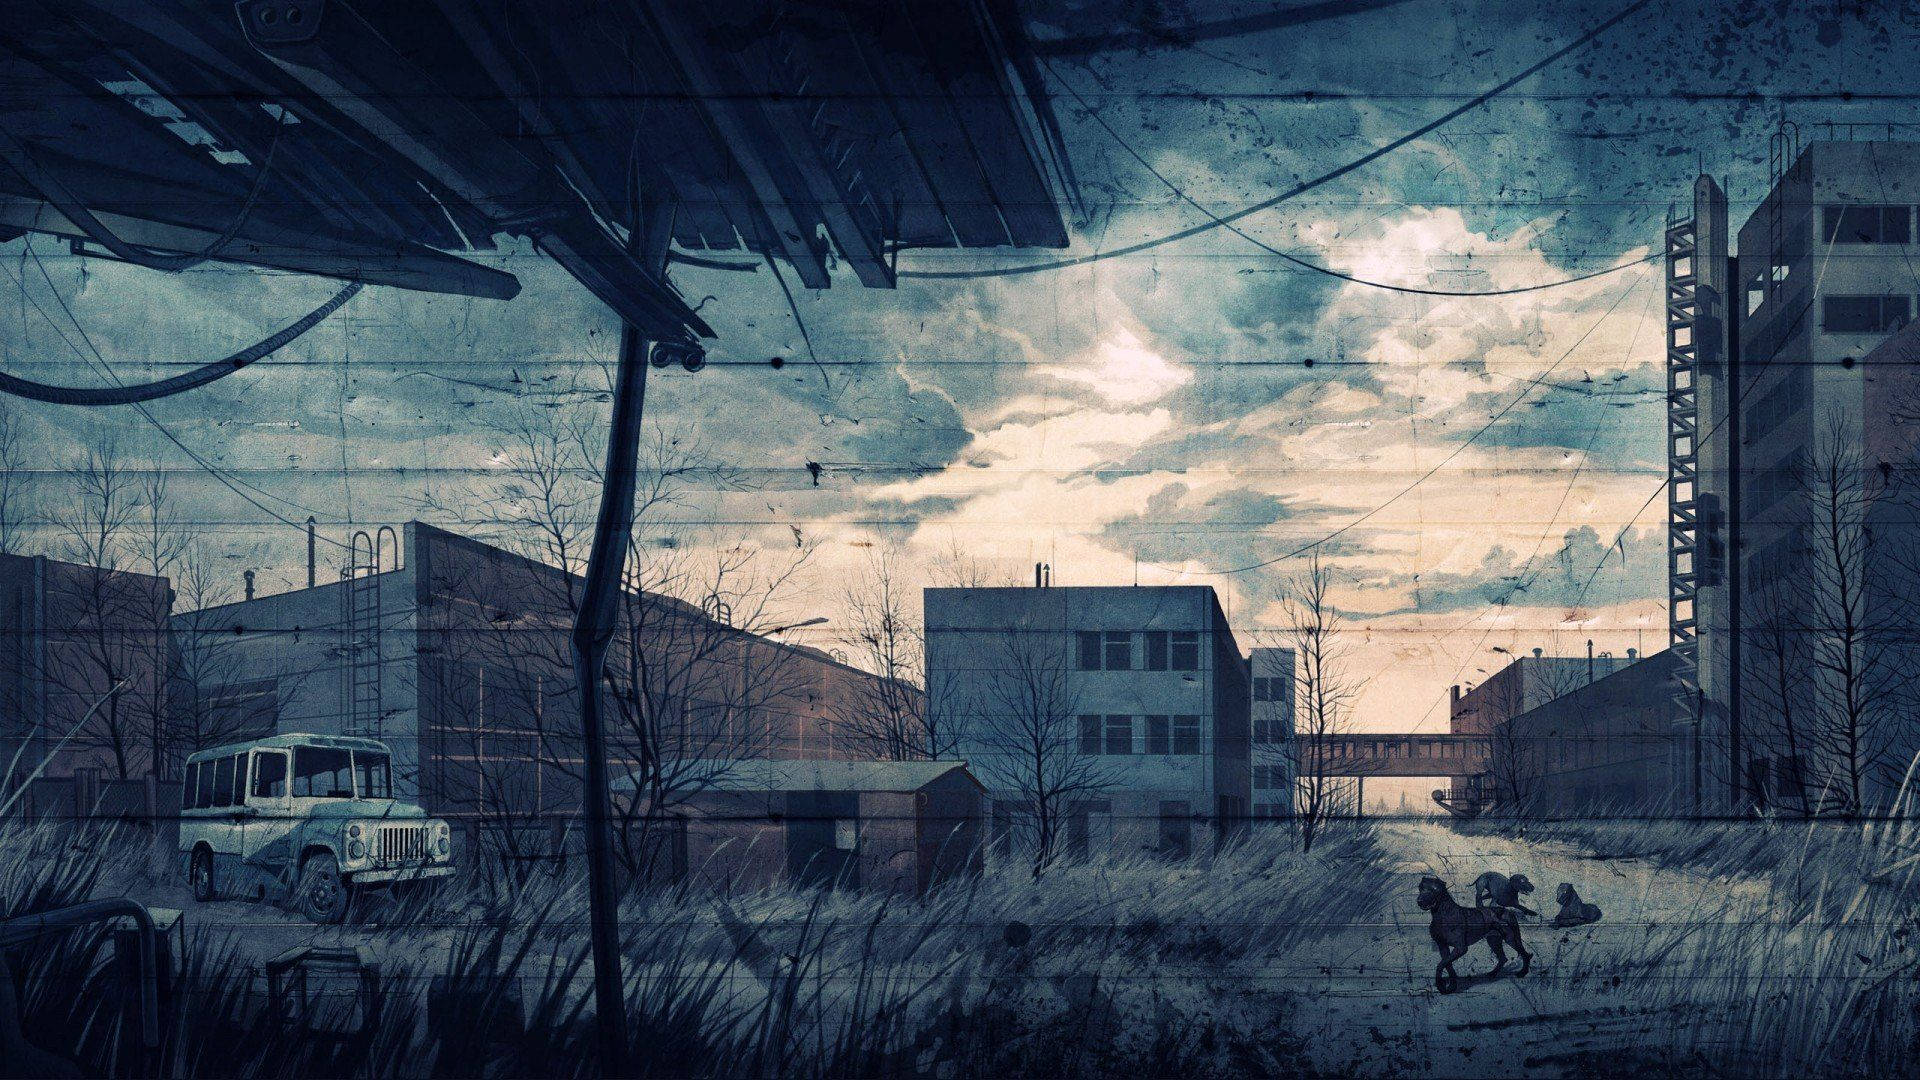 Chernobyl Desolate Nuclear Facility Background